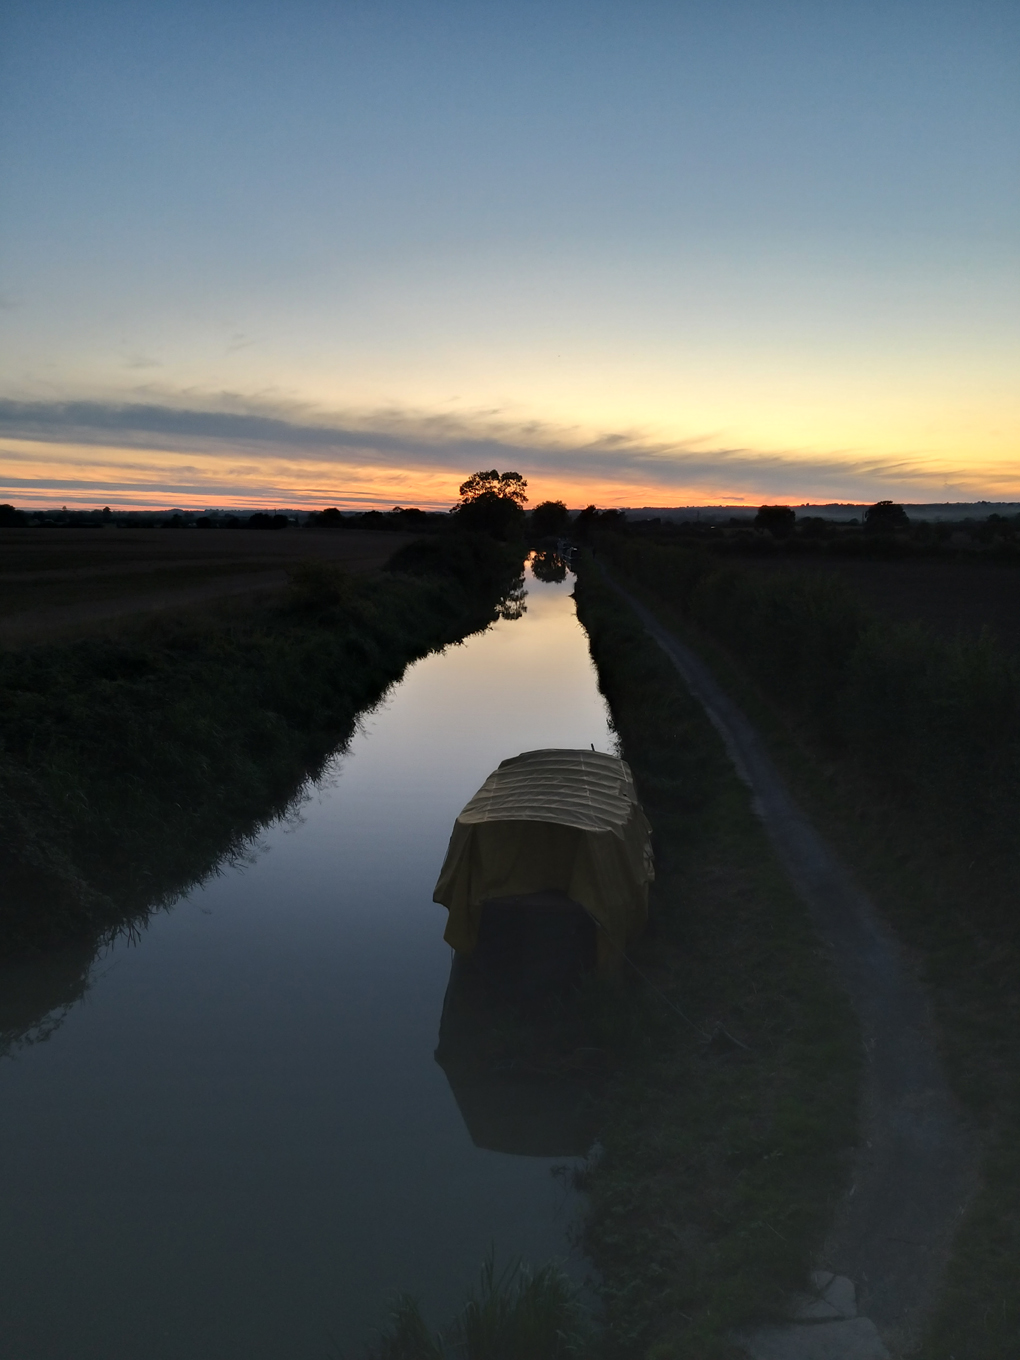 Sunset afterglow on the horizon, canal stretching away into the distance with a couple of trees and a solitary boat reflecting into it.